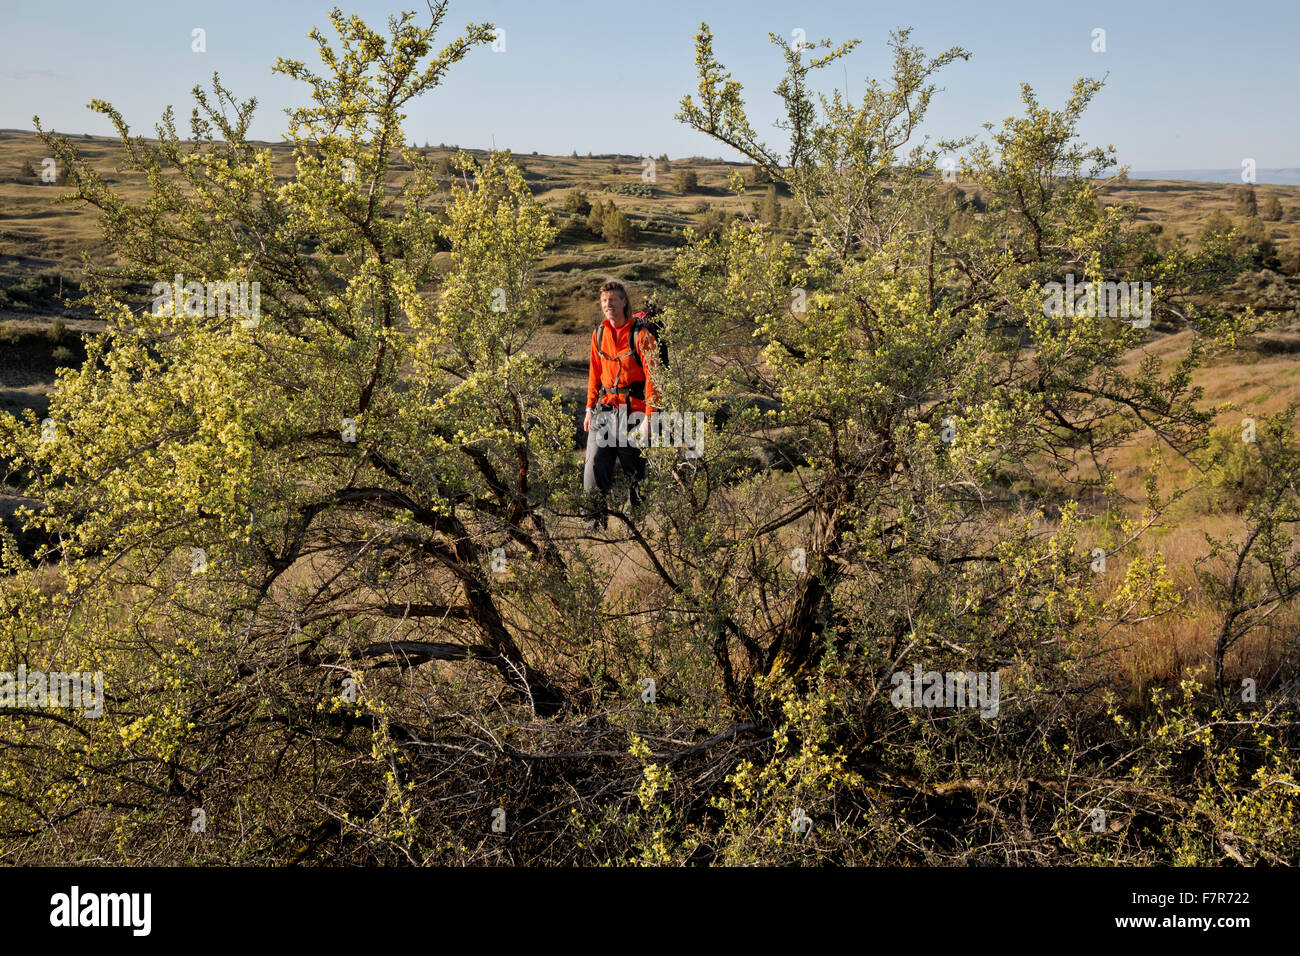 WASHINGTON - Hiker climbing a grass and gray rabbitbrush covered sand dune in Juniper Dunes Wilderness Area north of Pasco. Stock Photo